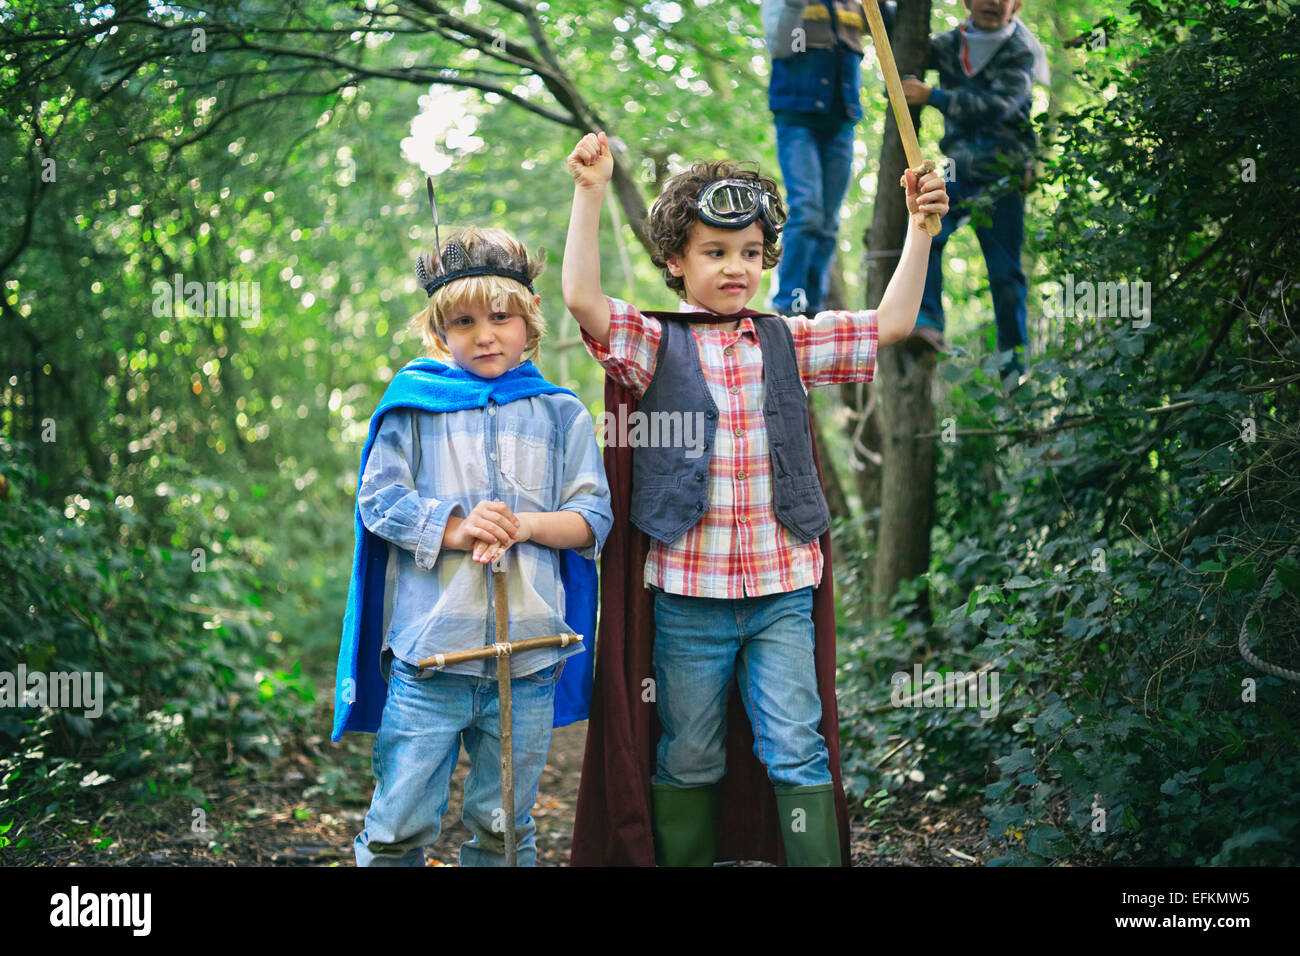 Two boys dressed up and playing in forest Stock Photo